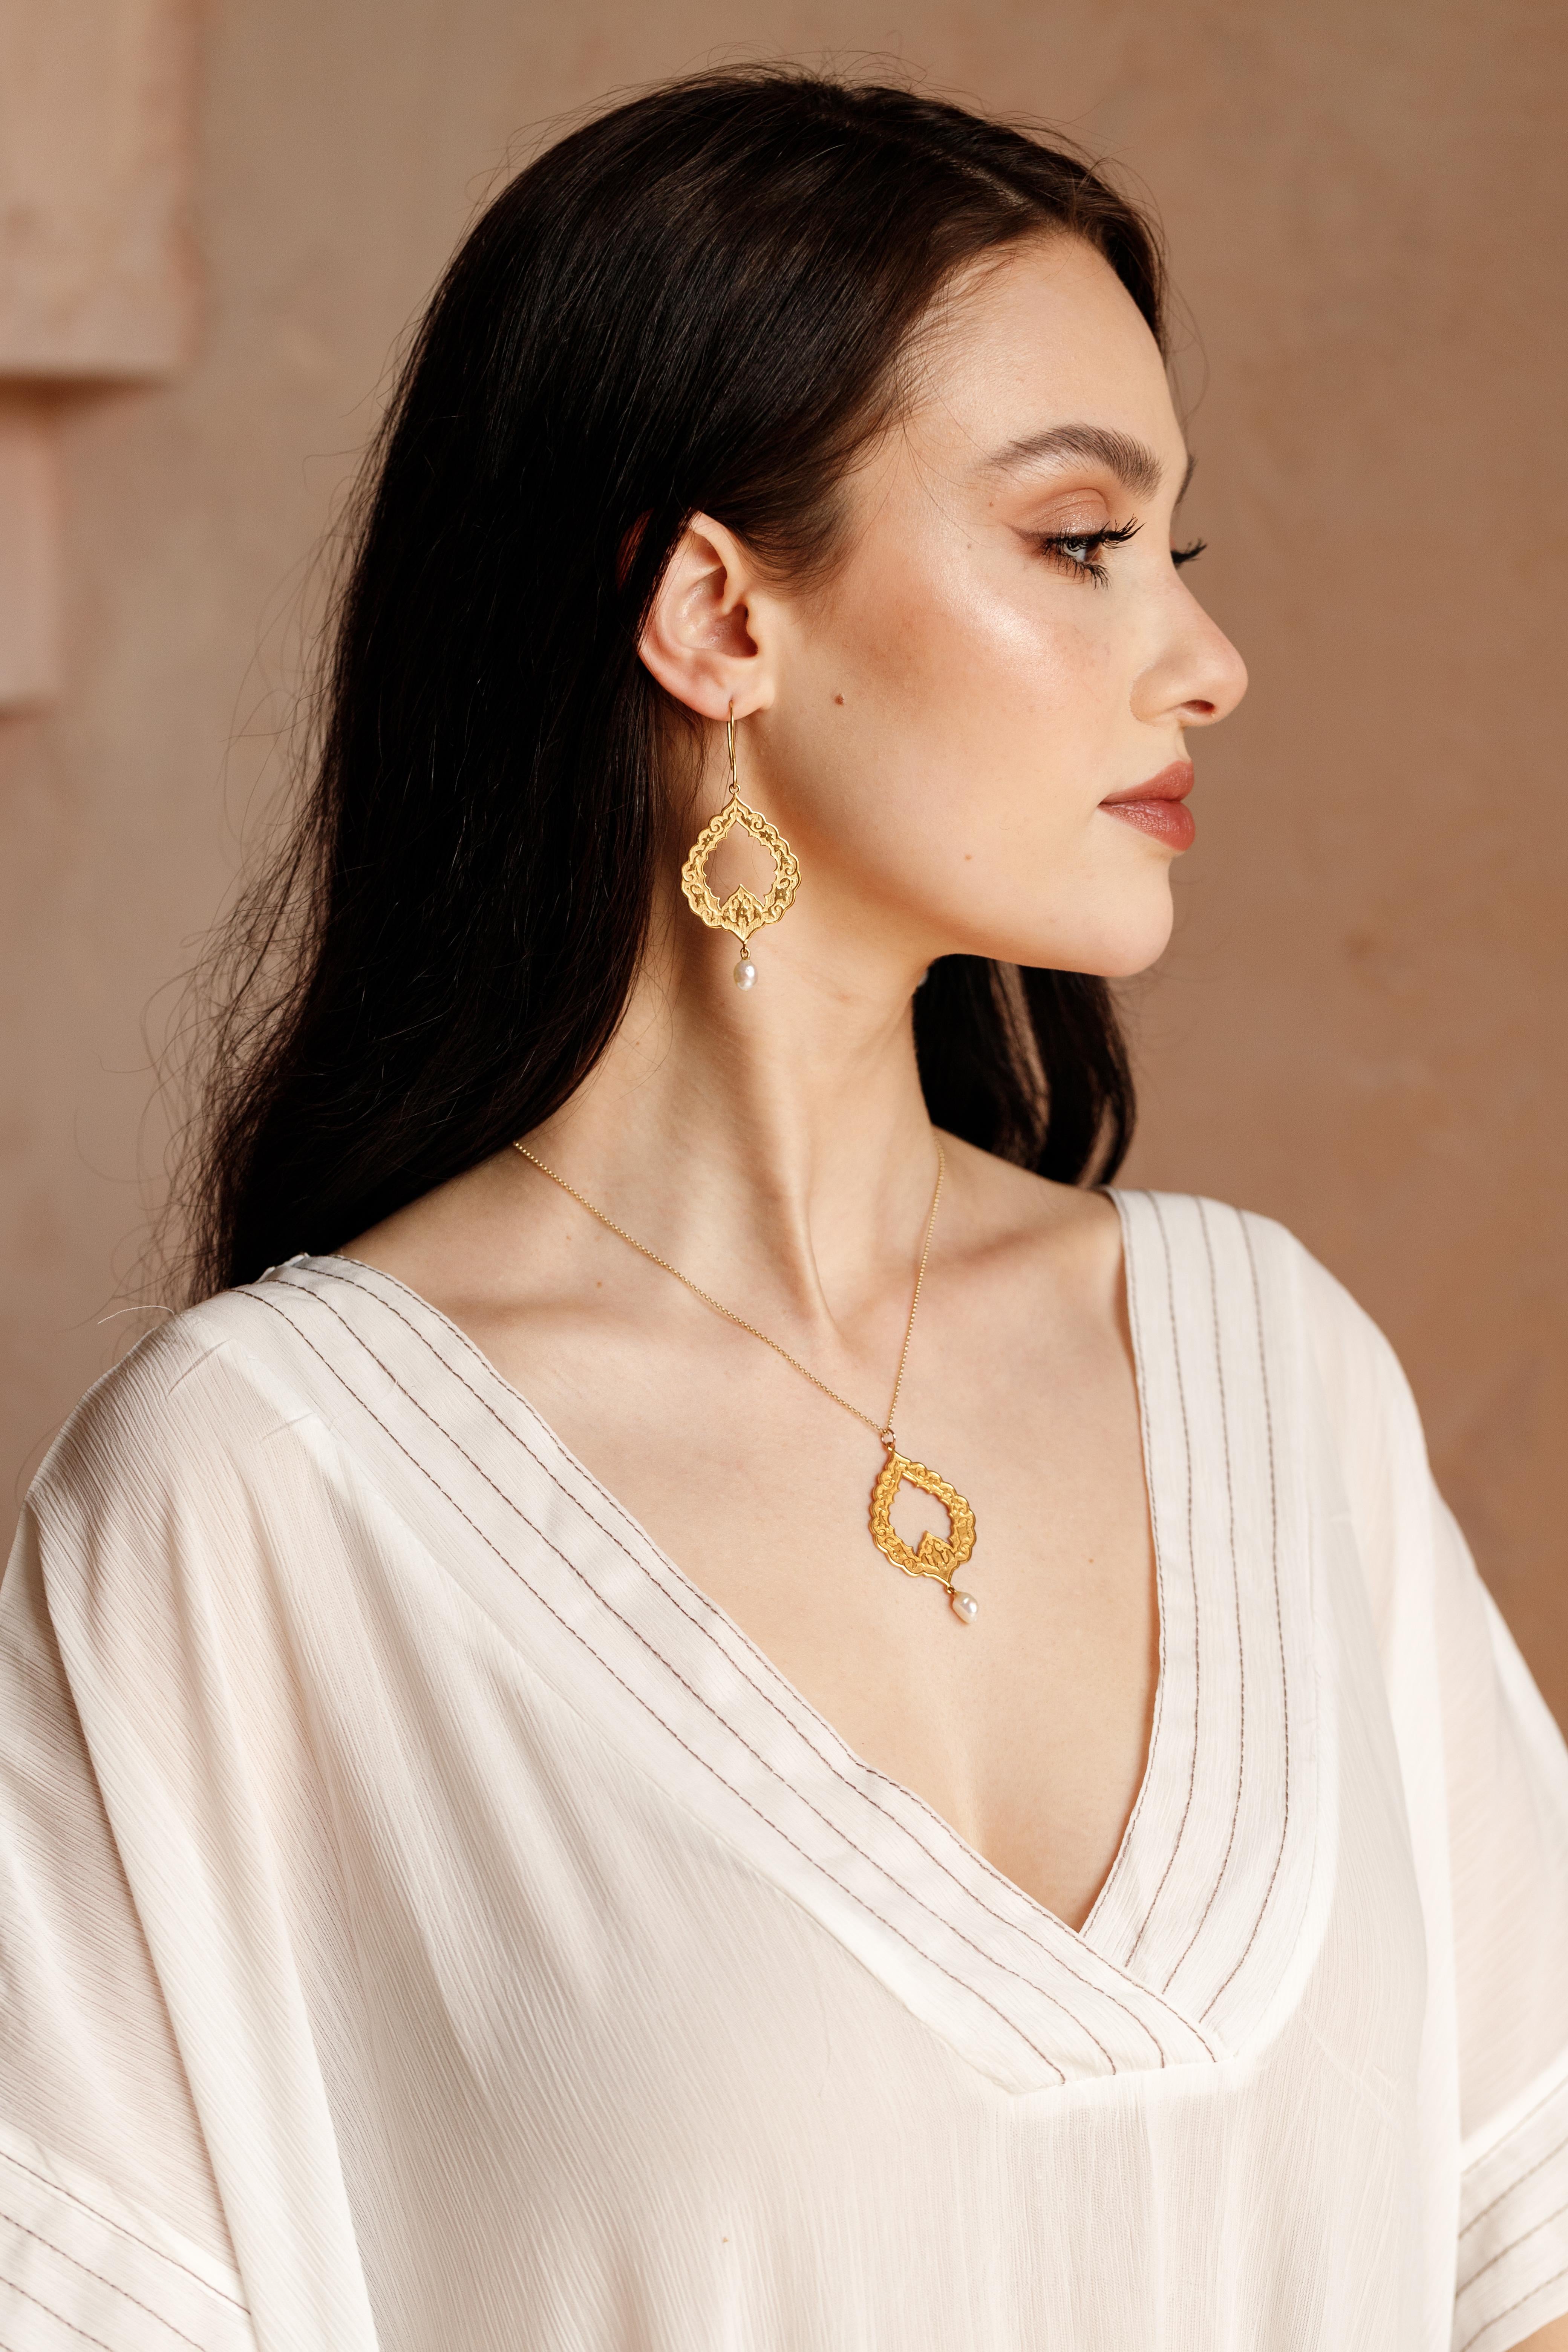 Eslimi pendant Crafted in 18K Yellow Gold and features 100% natural baroque pearl, was inspired by arabesque and Middle eastern art & architecture. This unique designer pendant is timeless and eye-catching and has delicate pattern on both sides, It